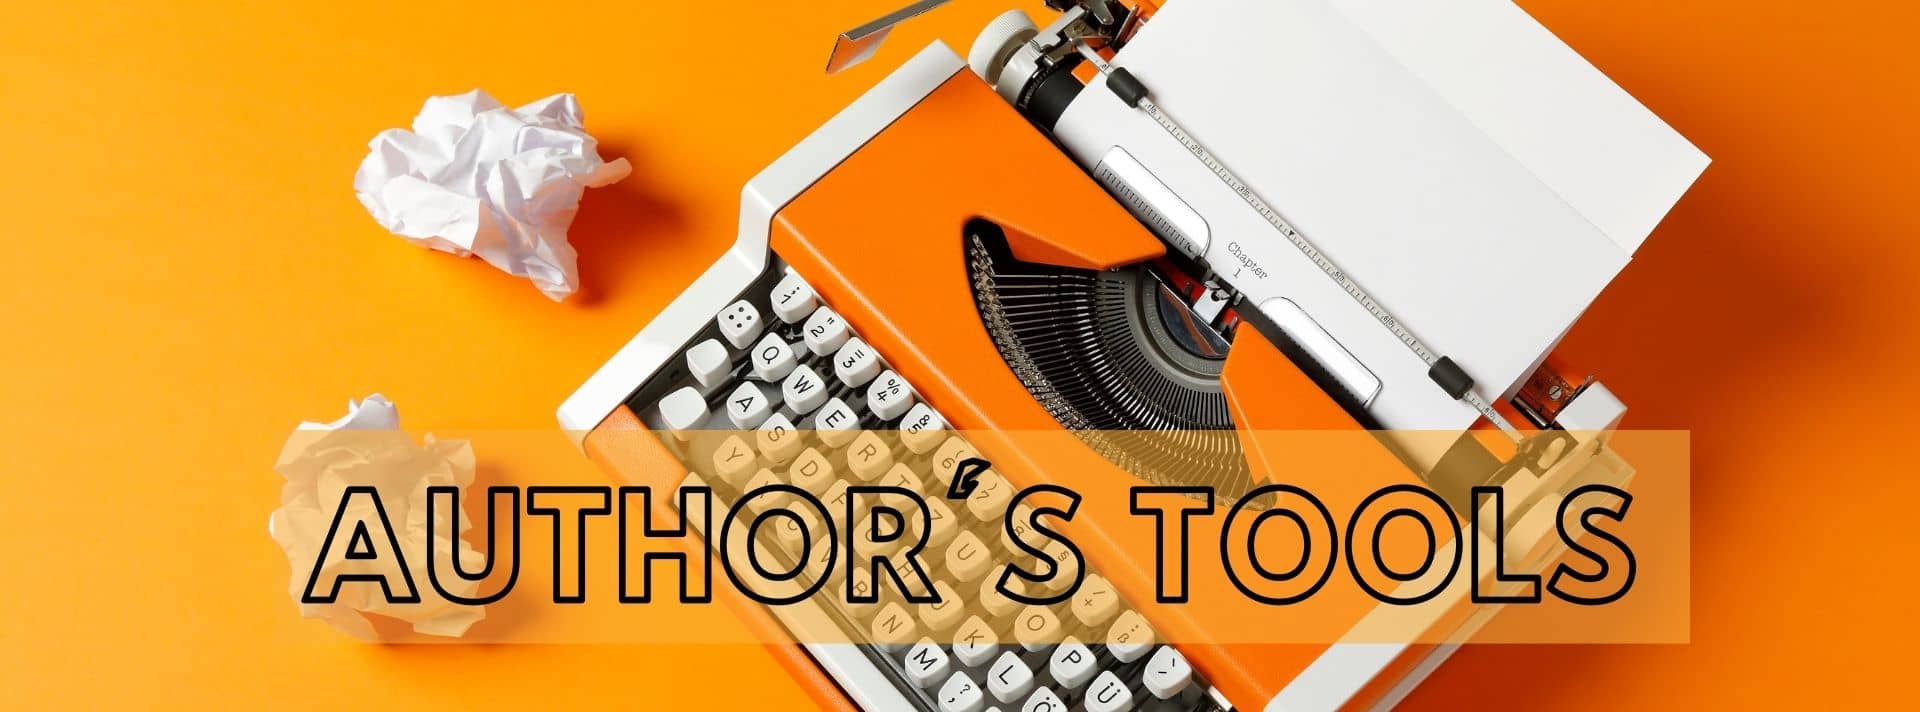 Author's tools Header Image of a typewriter